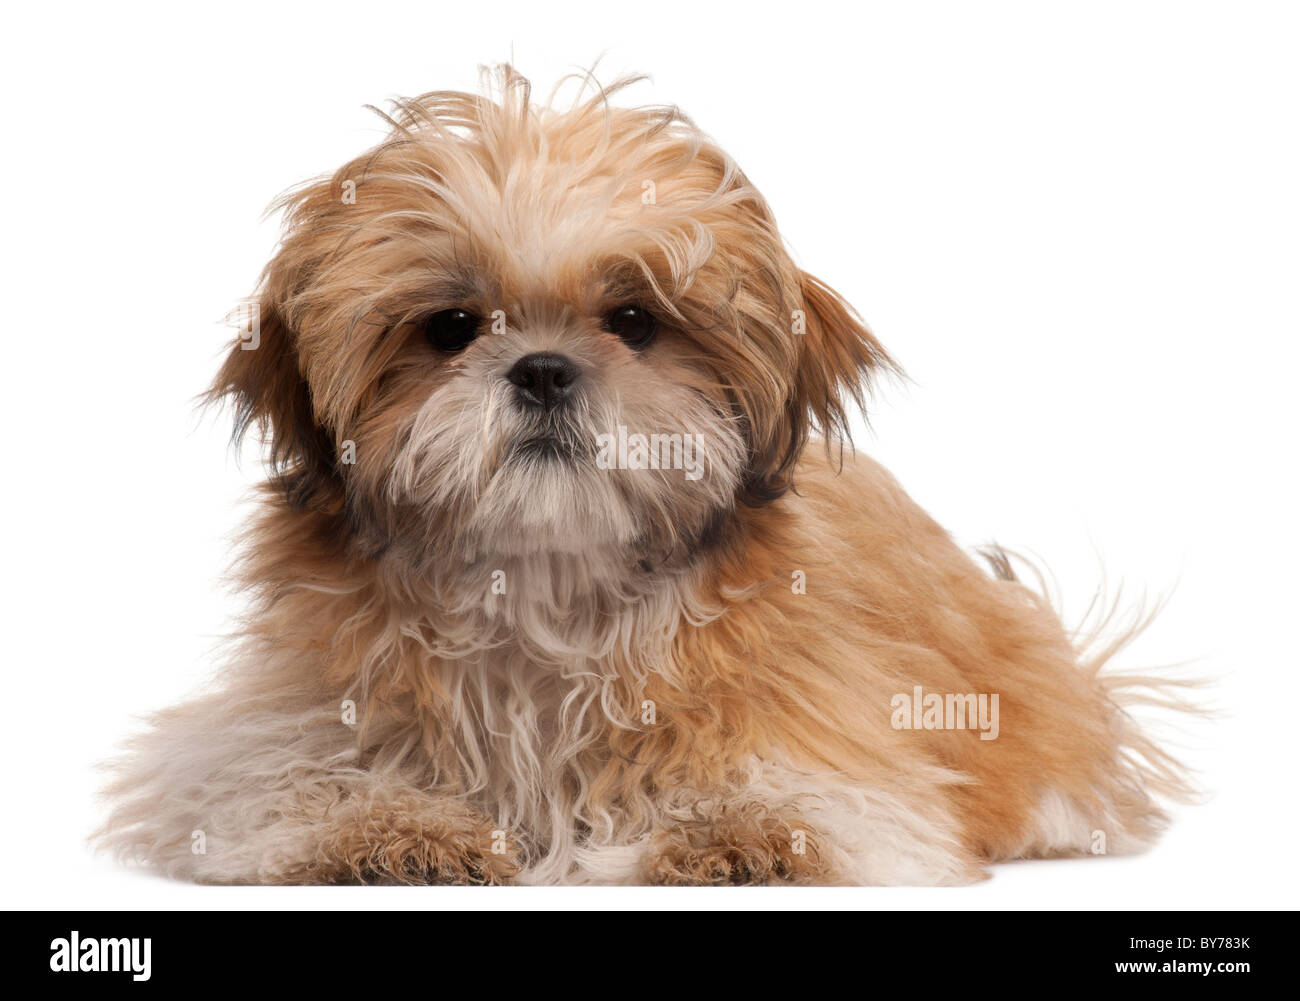 Shih-tzu puppy, 6 months old, lying in front of white background Stock Photo